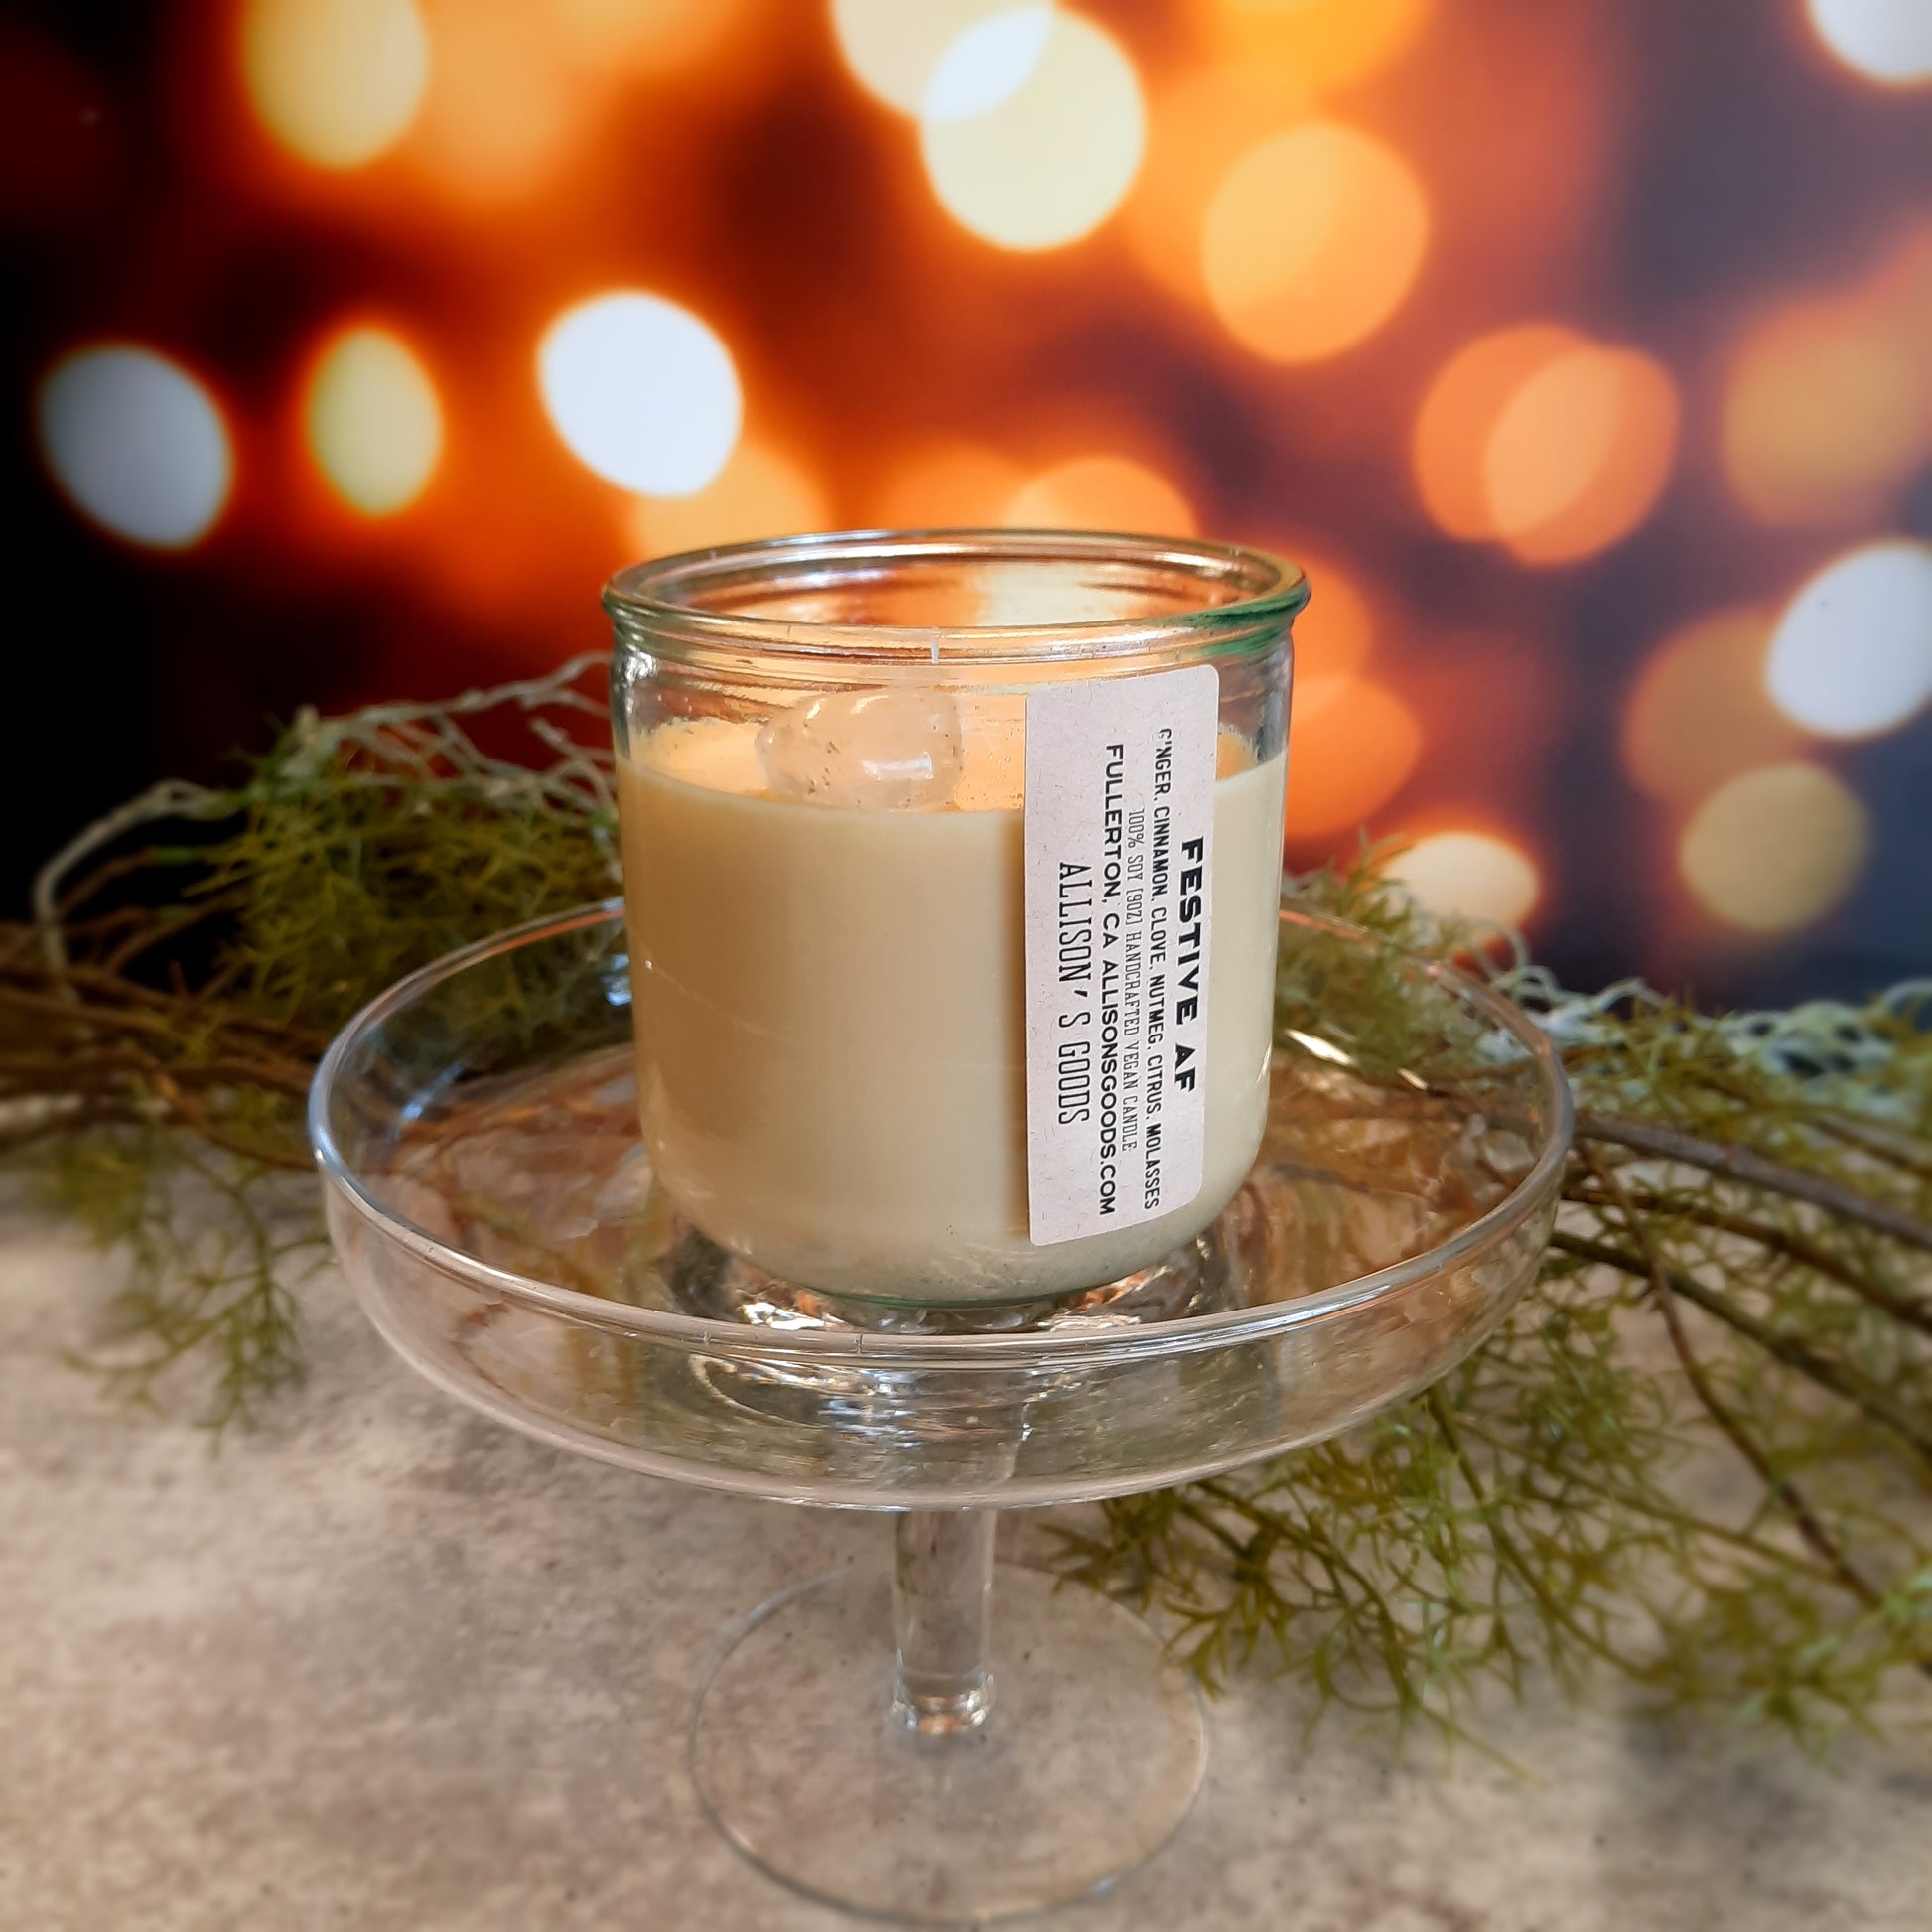 Handmade Concrete Soy Candle Organic Soy Wax Candle in Concrete